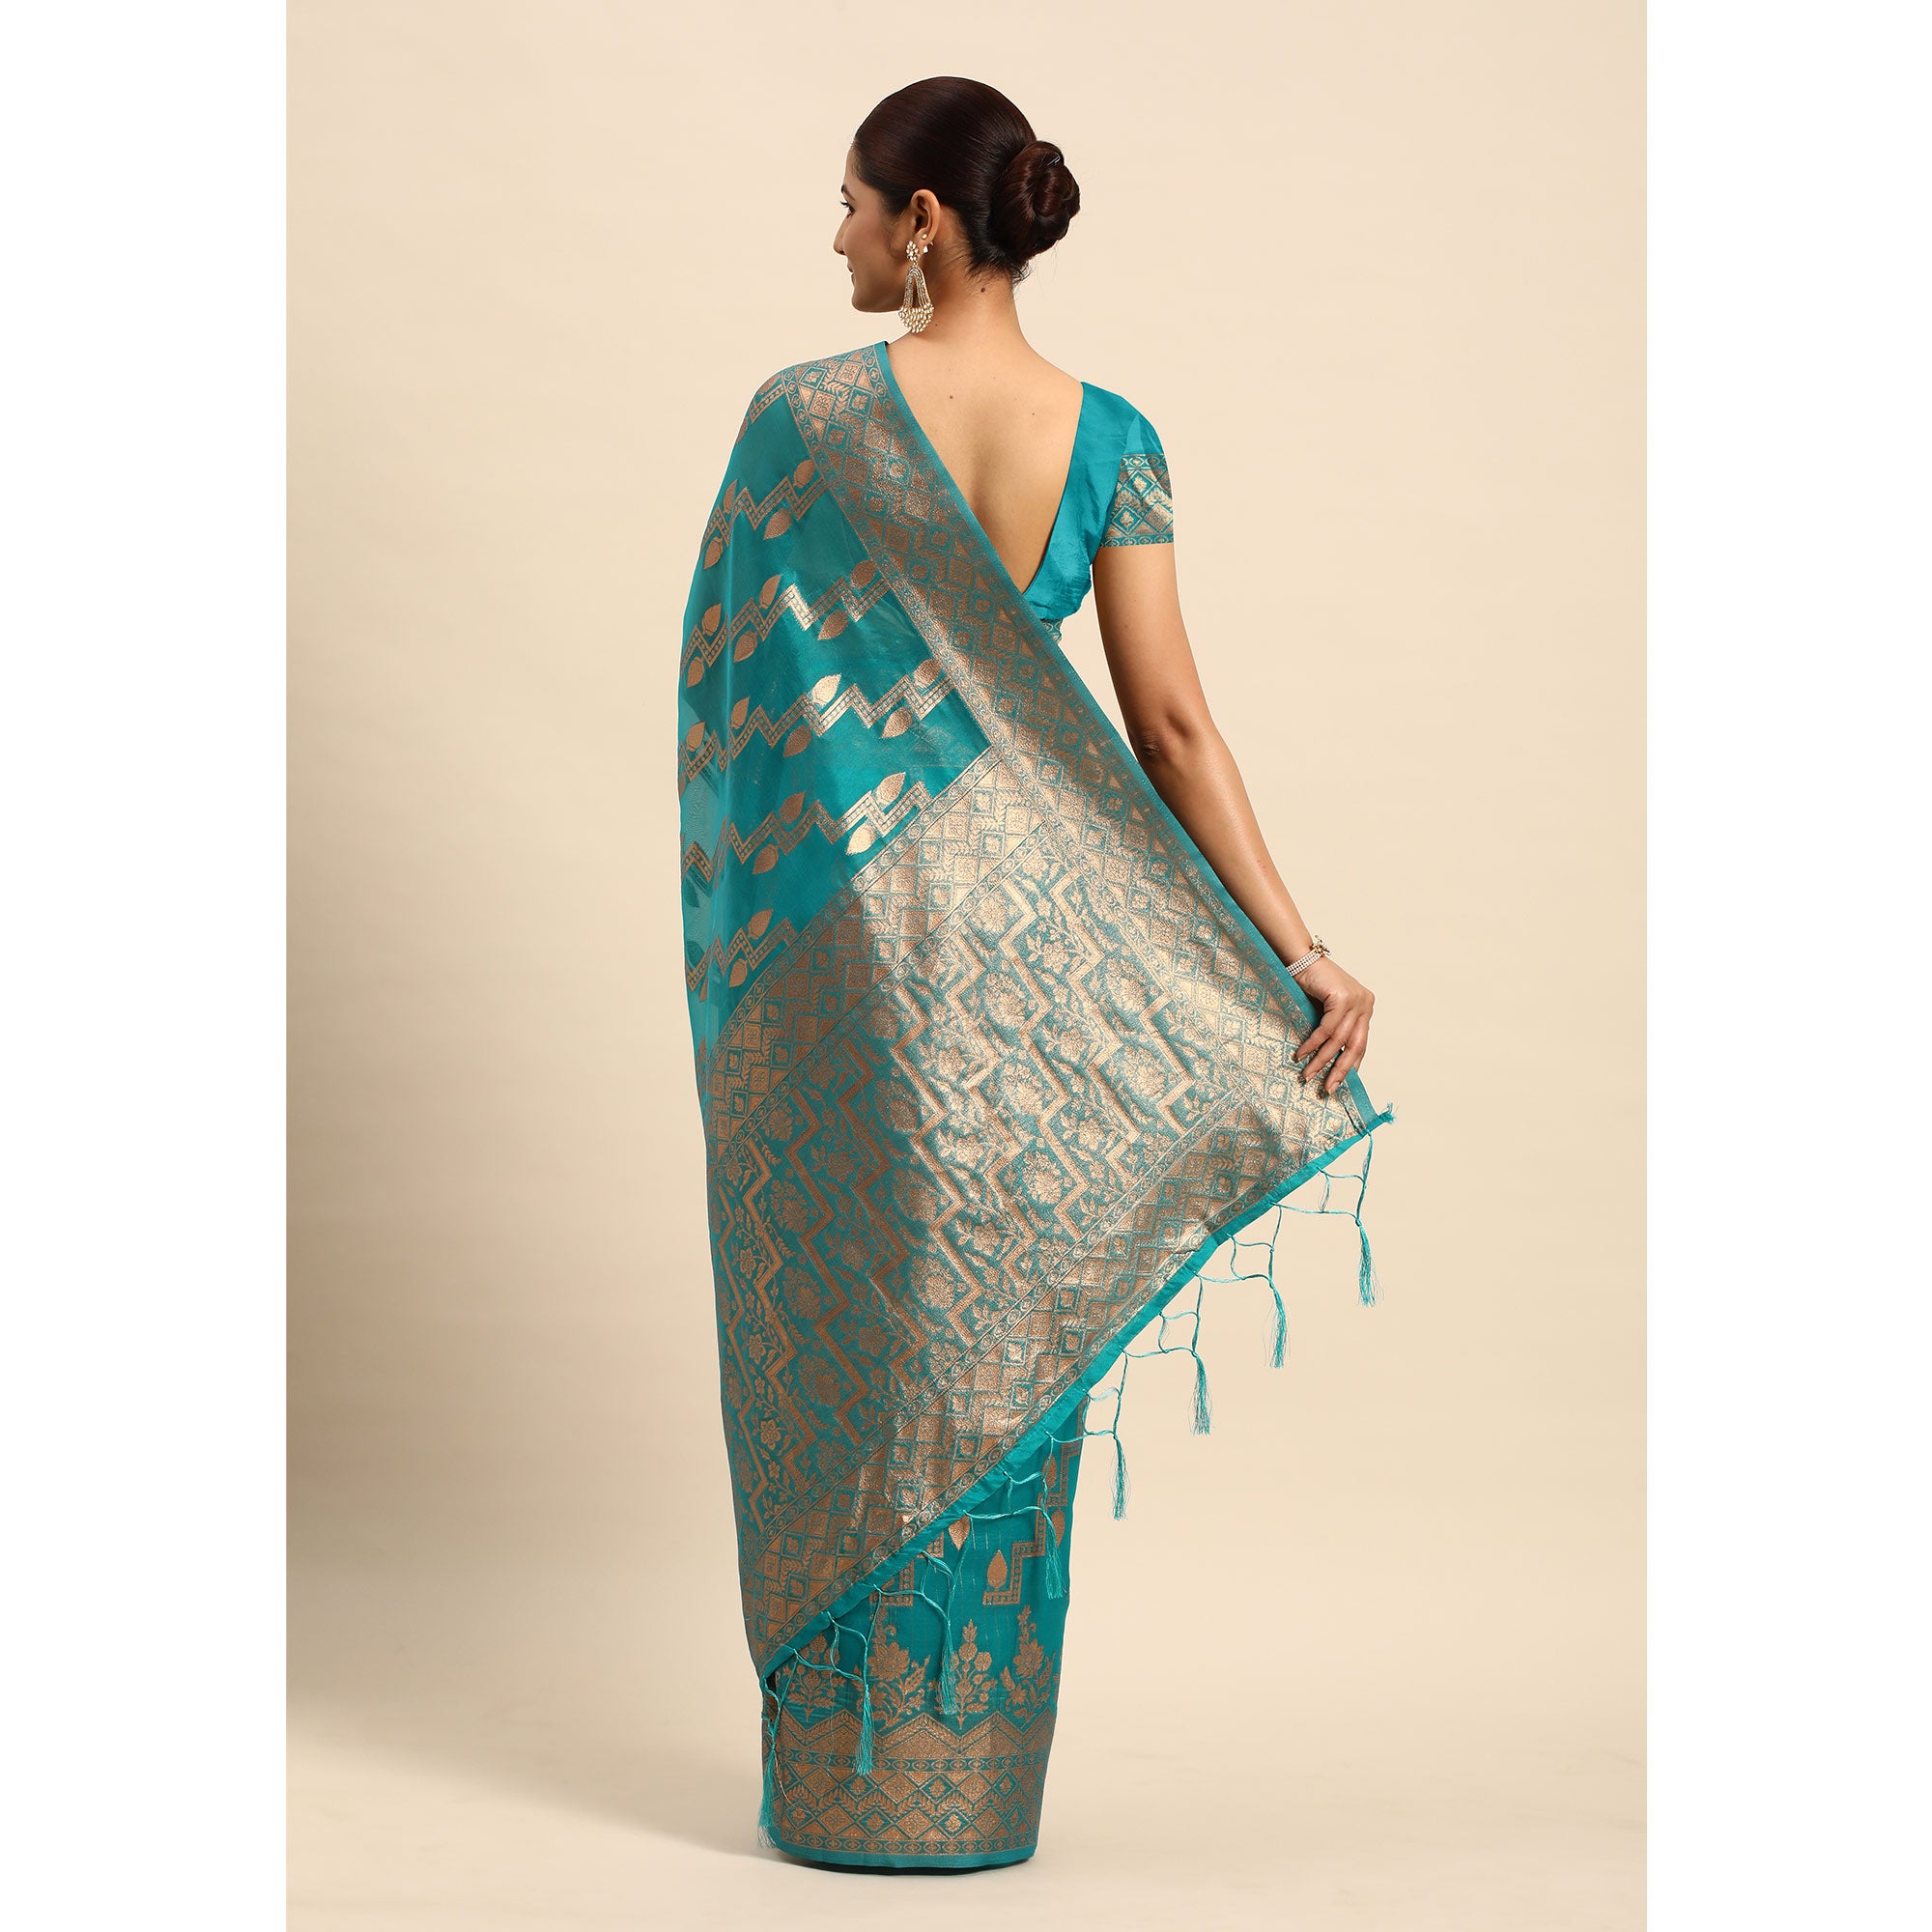 Turquoise Floral Woven Organza Silk Saree With Tassels